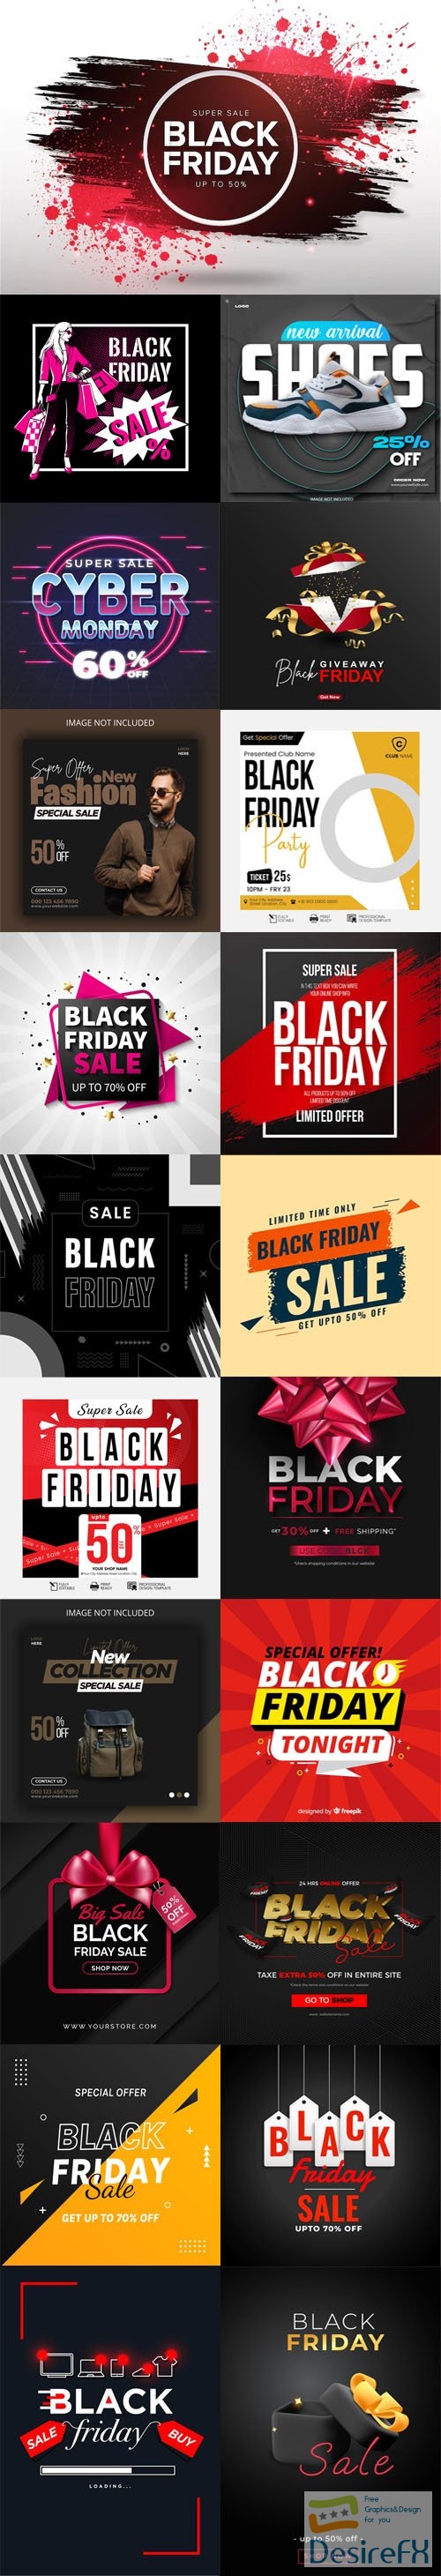 Black Friday - 20+ Web Banners & Backgrounds Vector Templates Vol.6